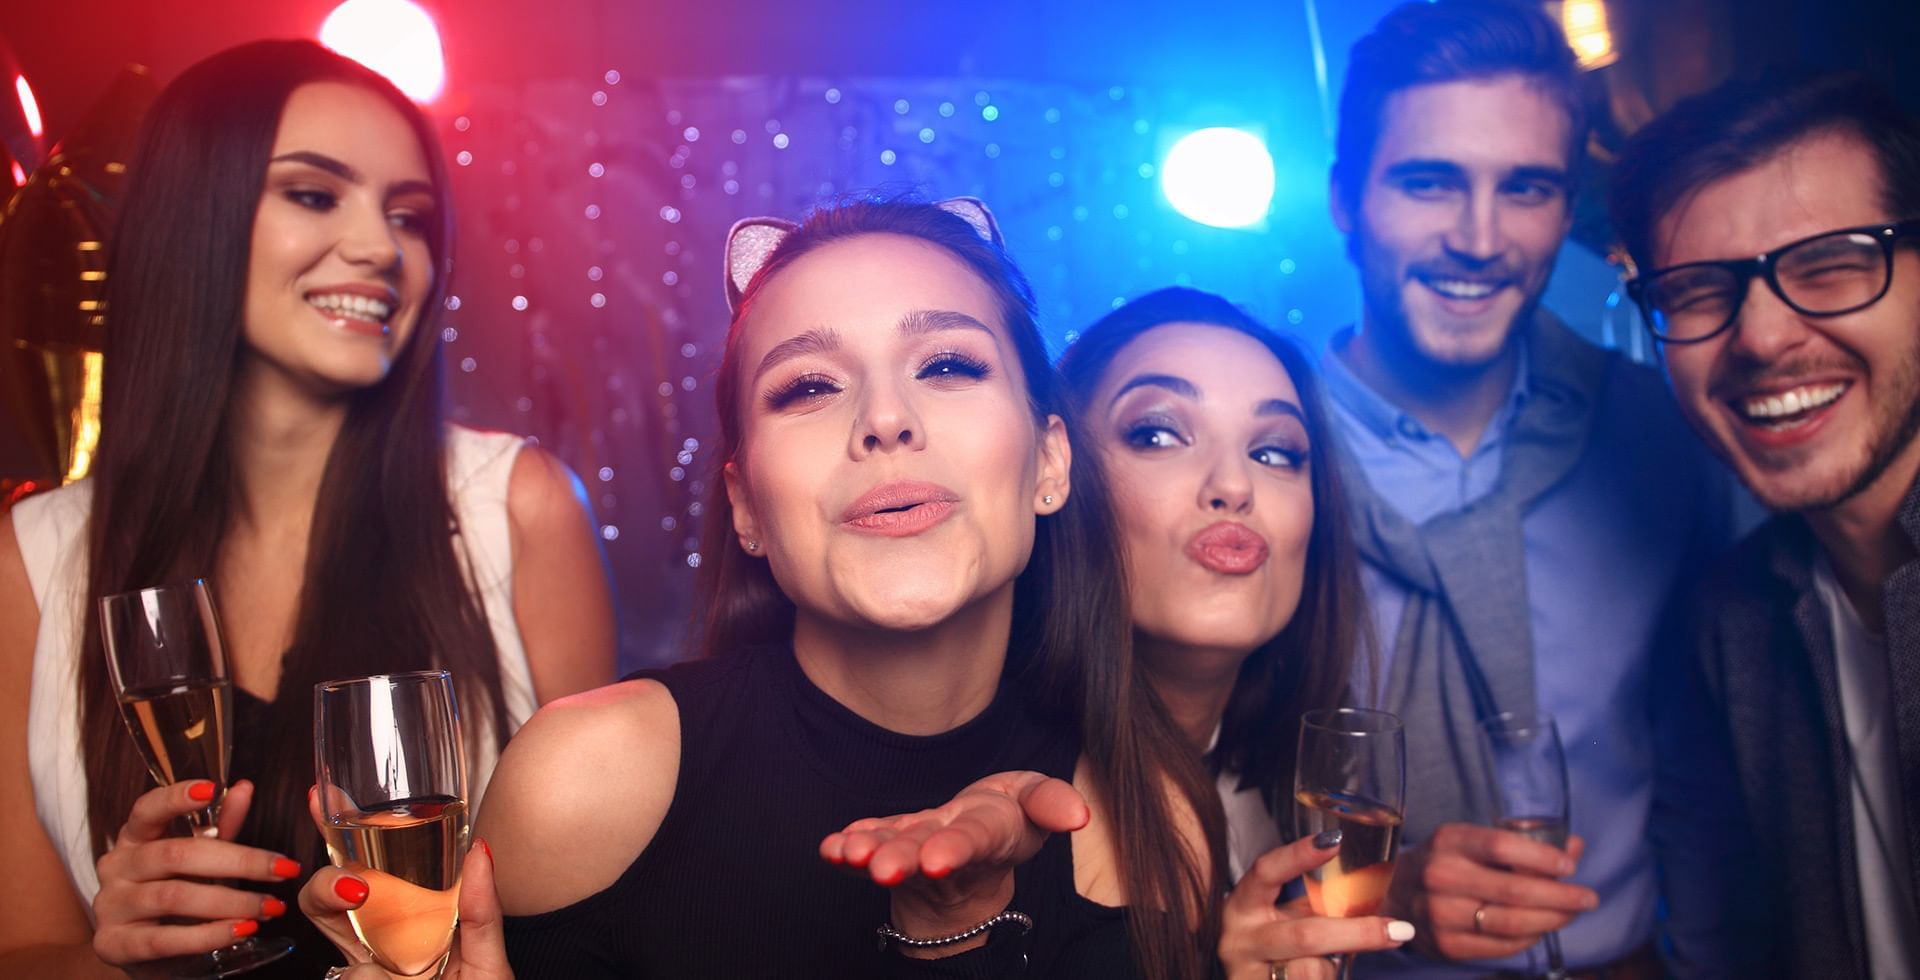 Group of friends celebrating at a party or event